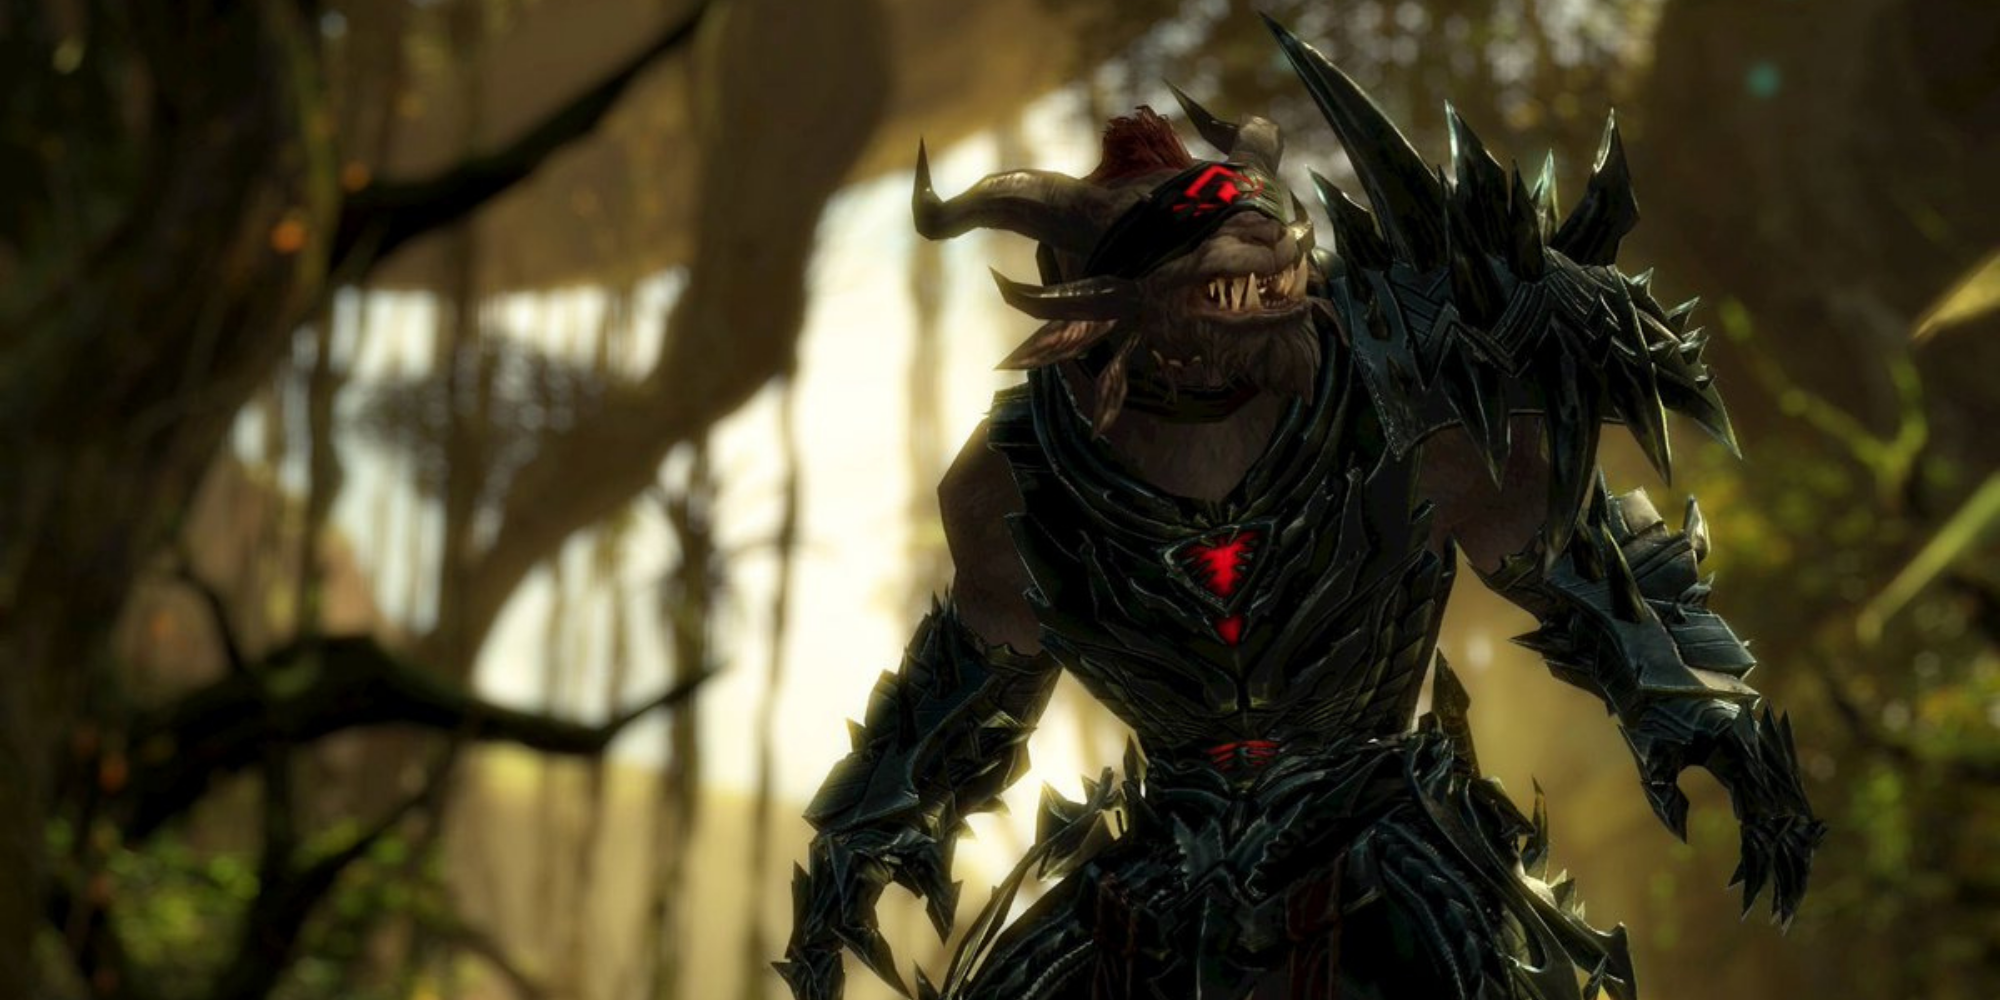 Guild Wars 2 - Charr Revenant in the woods